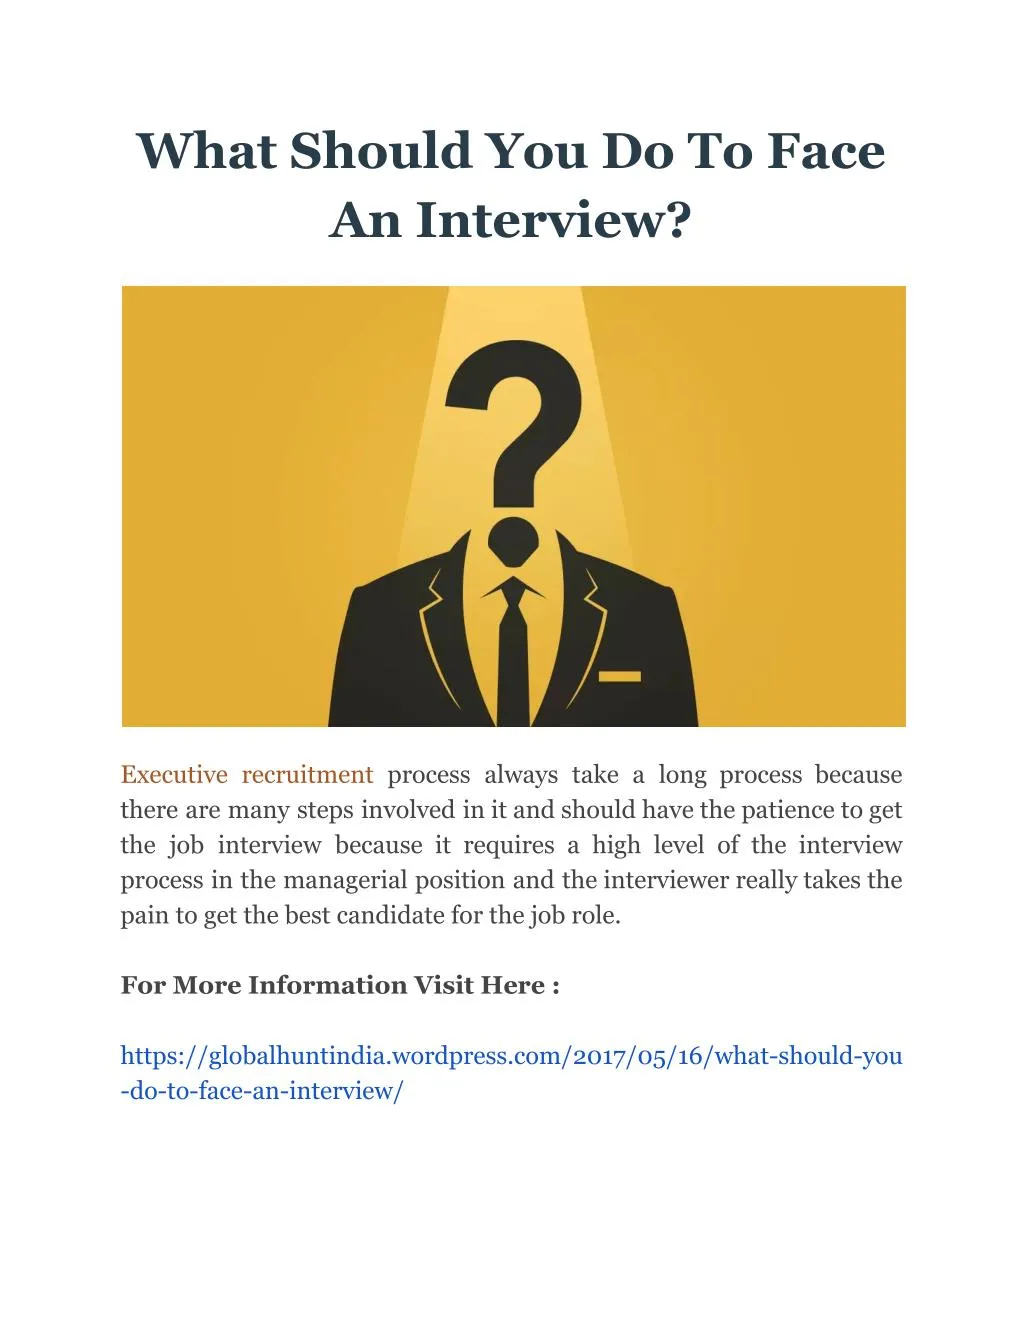 what should you do to face an interview